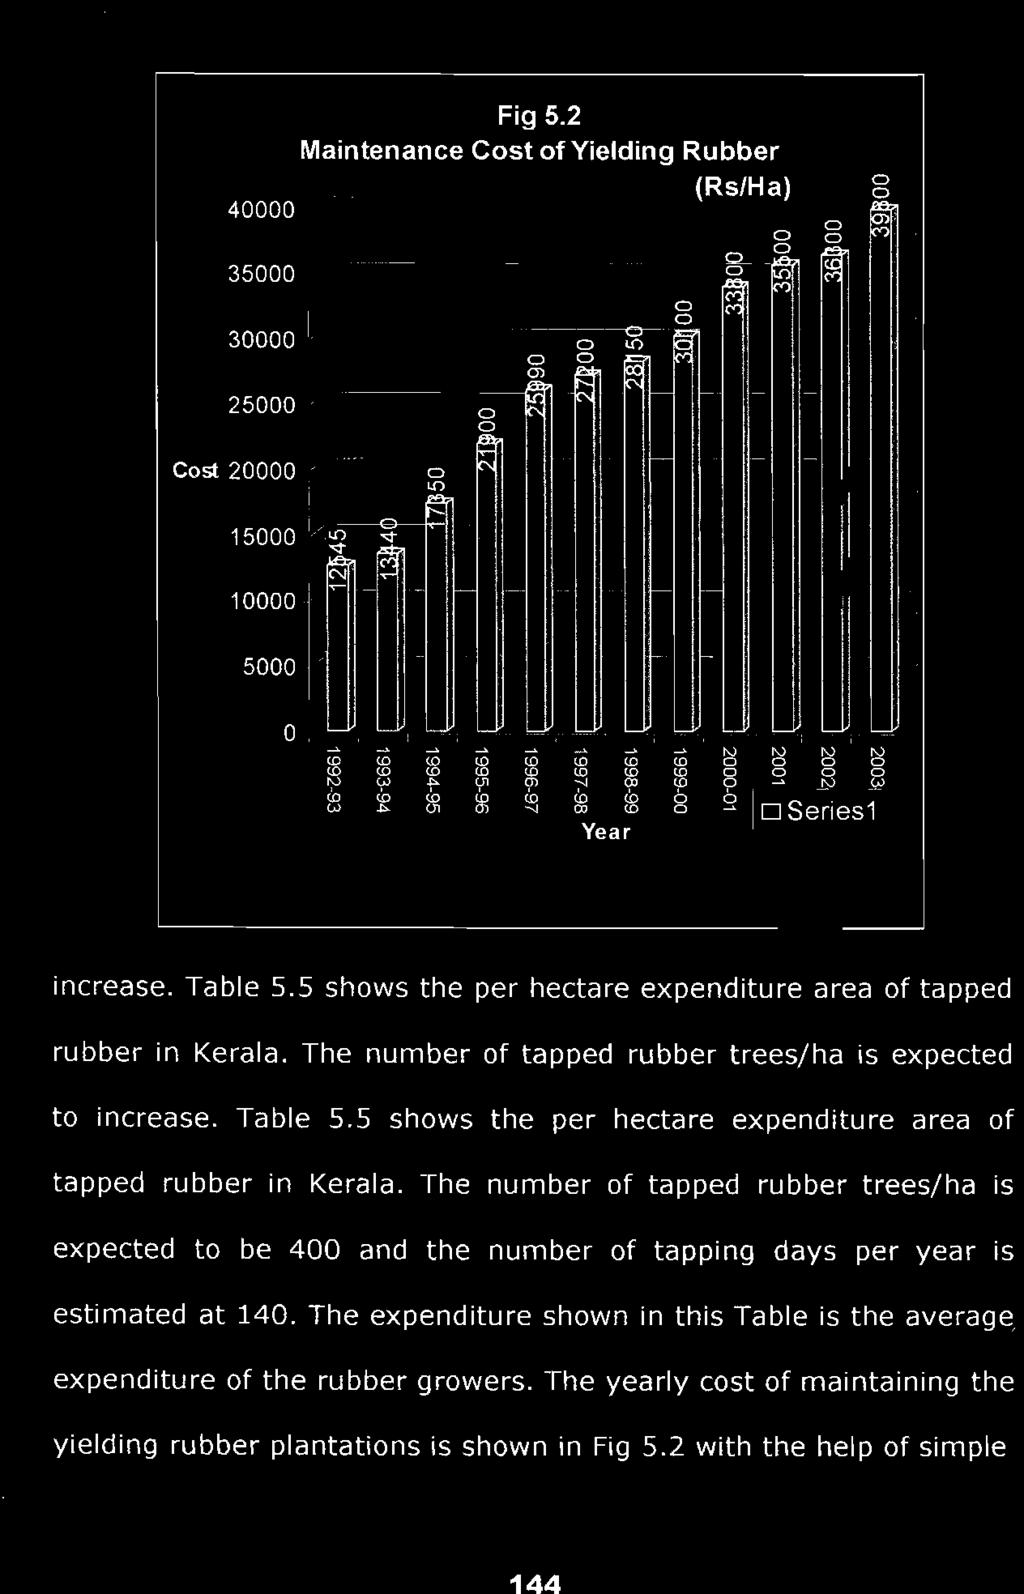 5 shows the per hectare expenditure area of tapped rubber in Kerala.